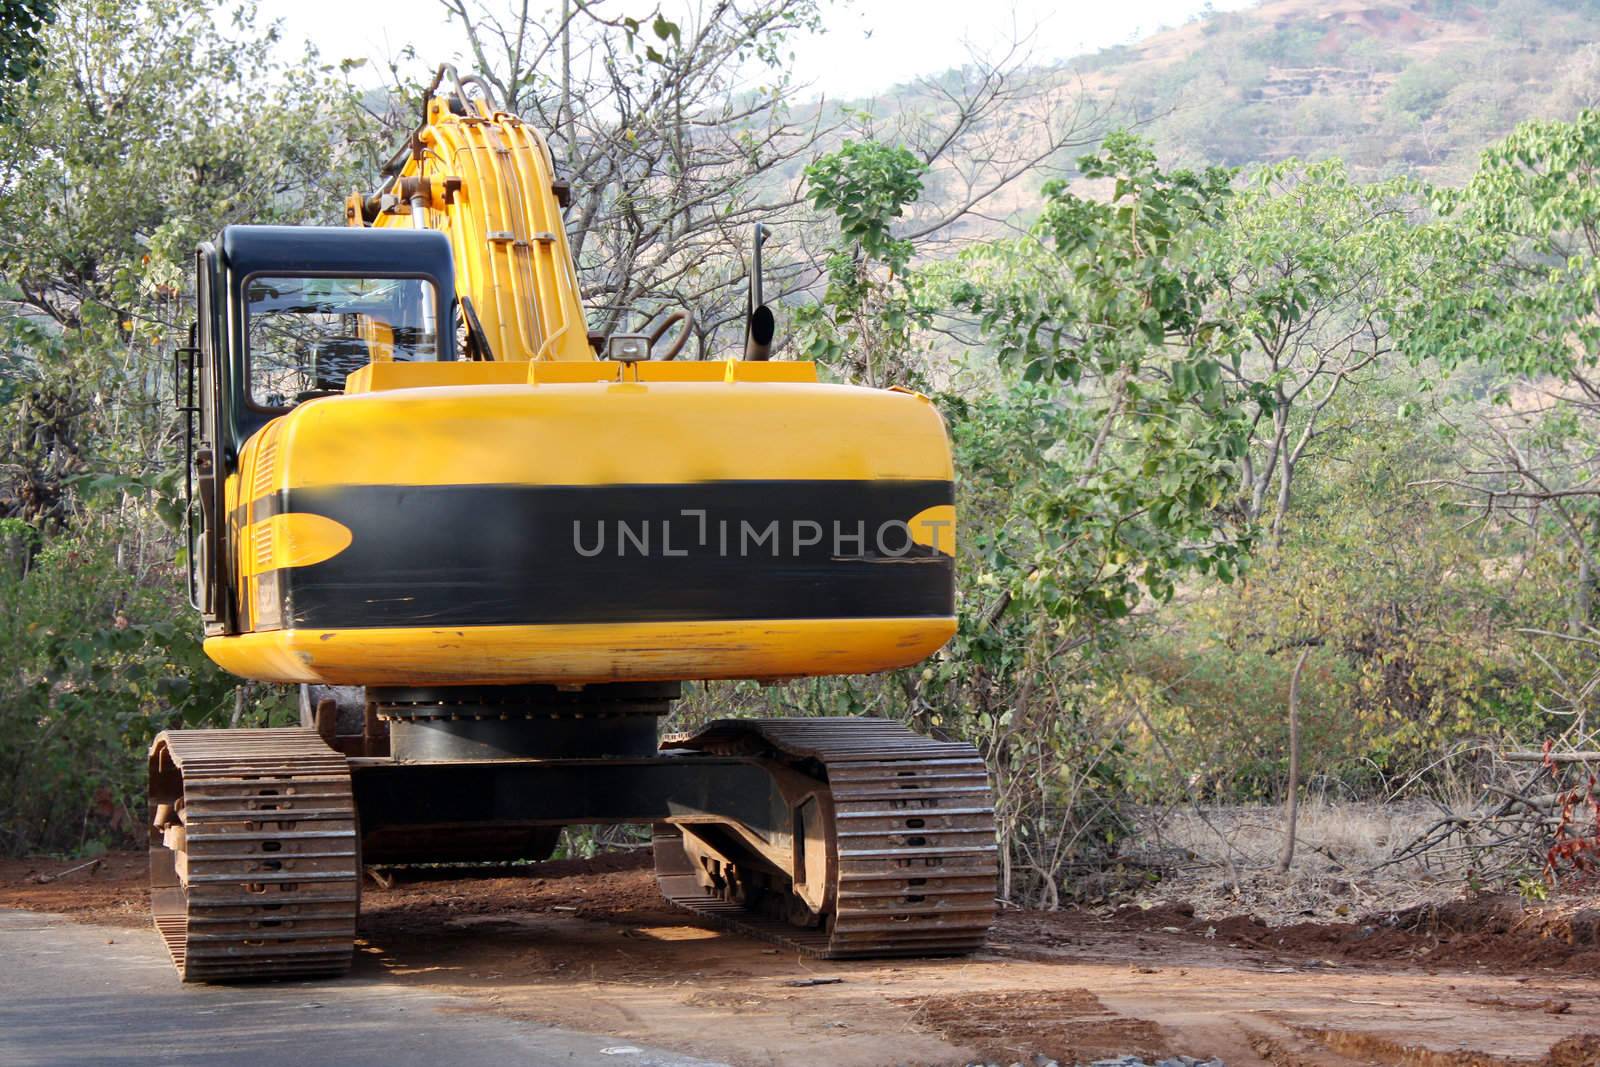 A heavy-duty vehicle used for land moving, used in road construction.